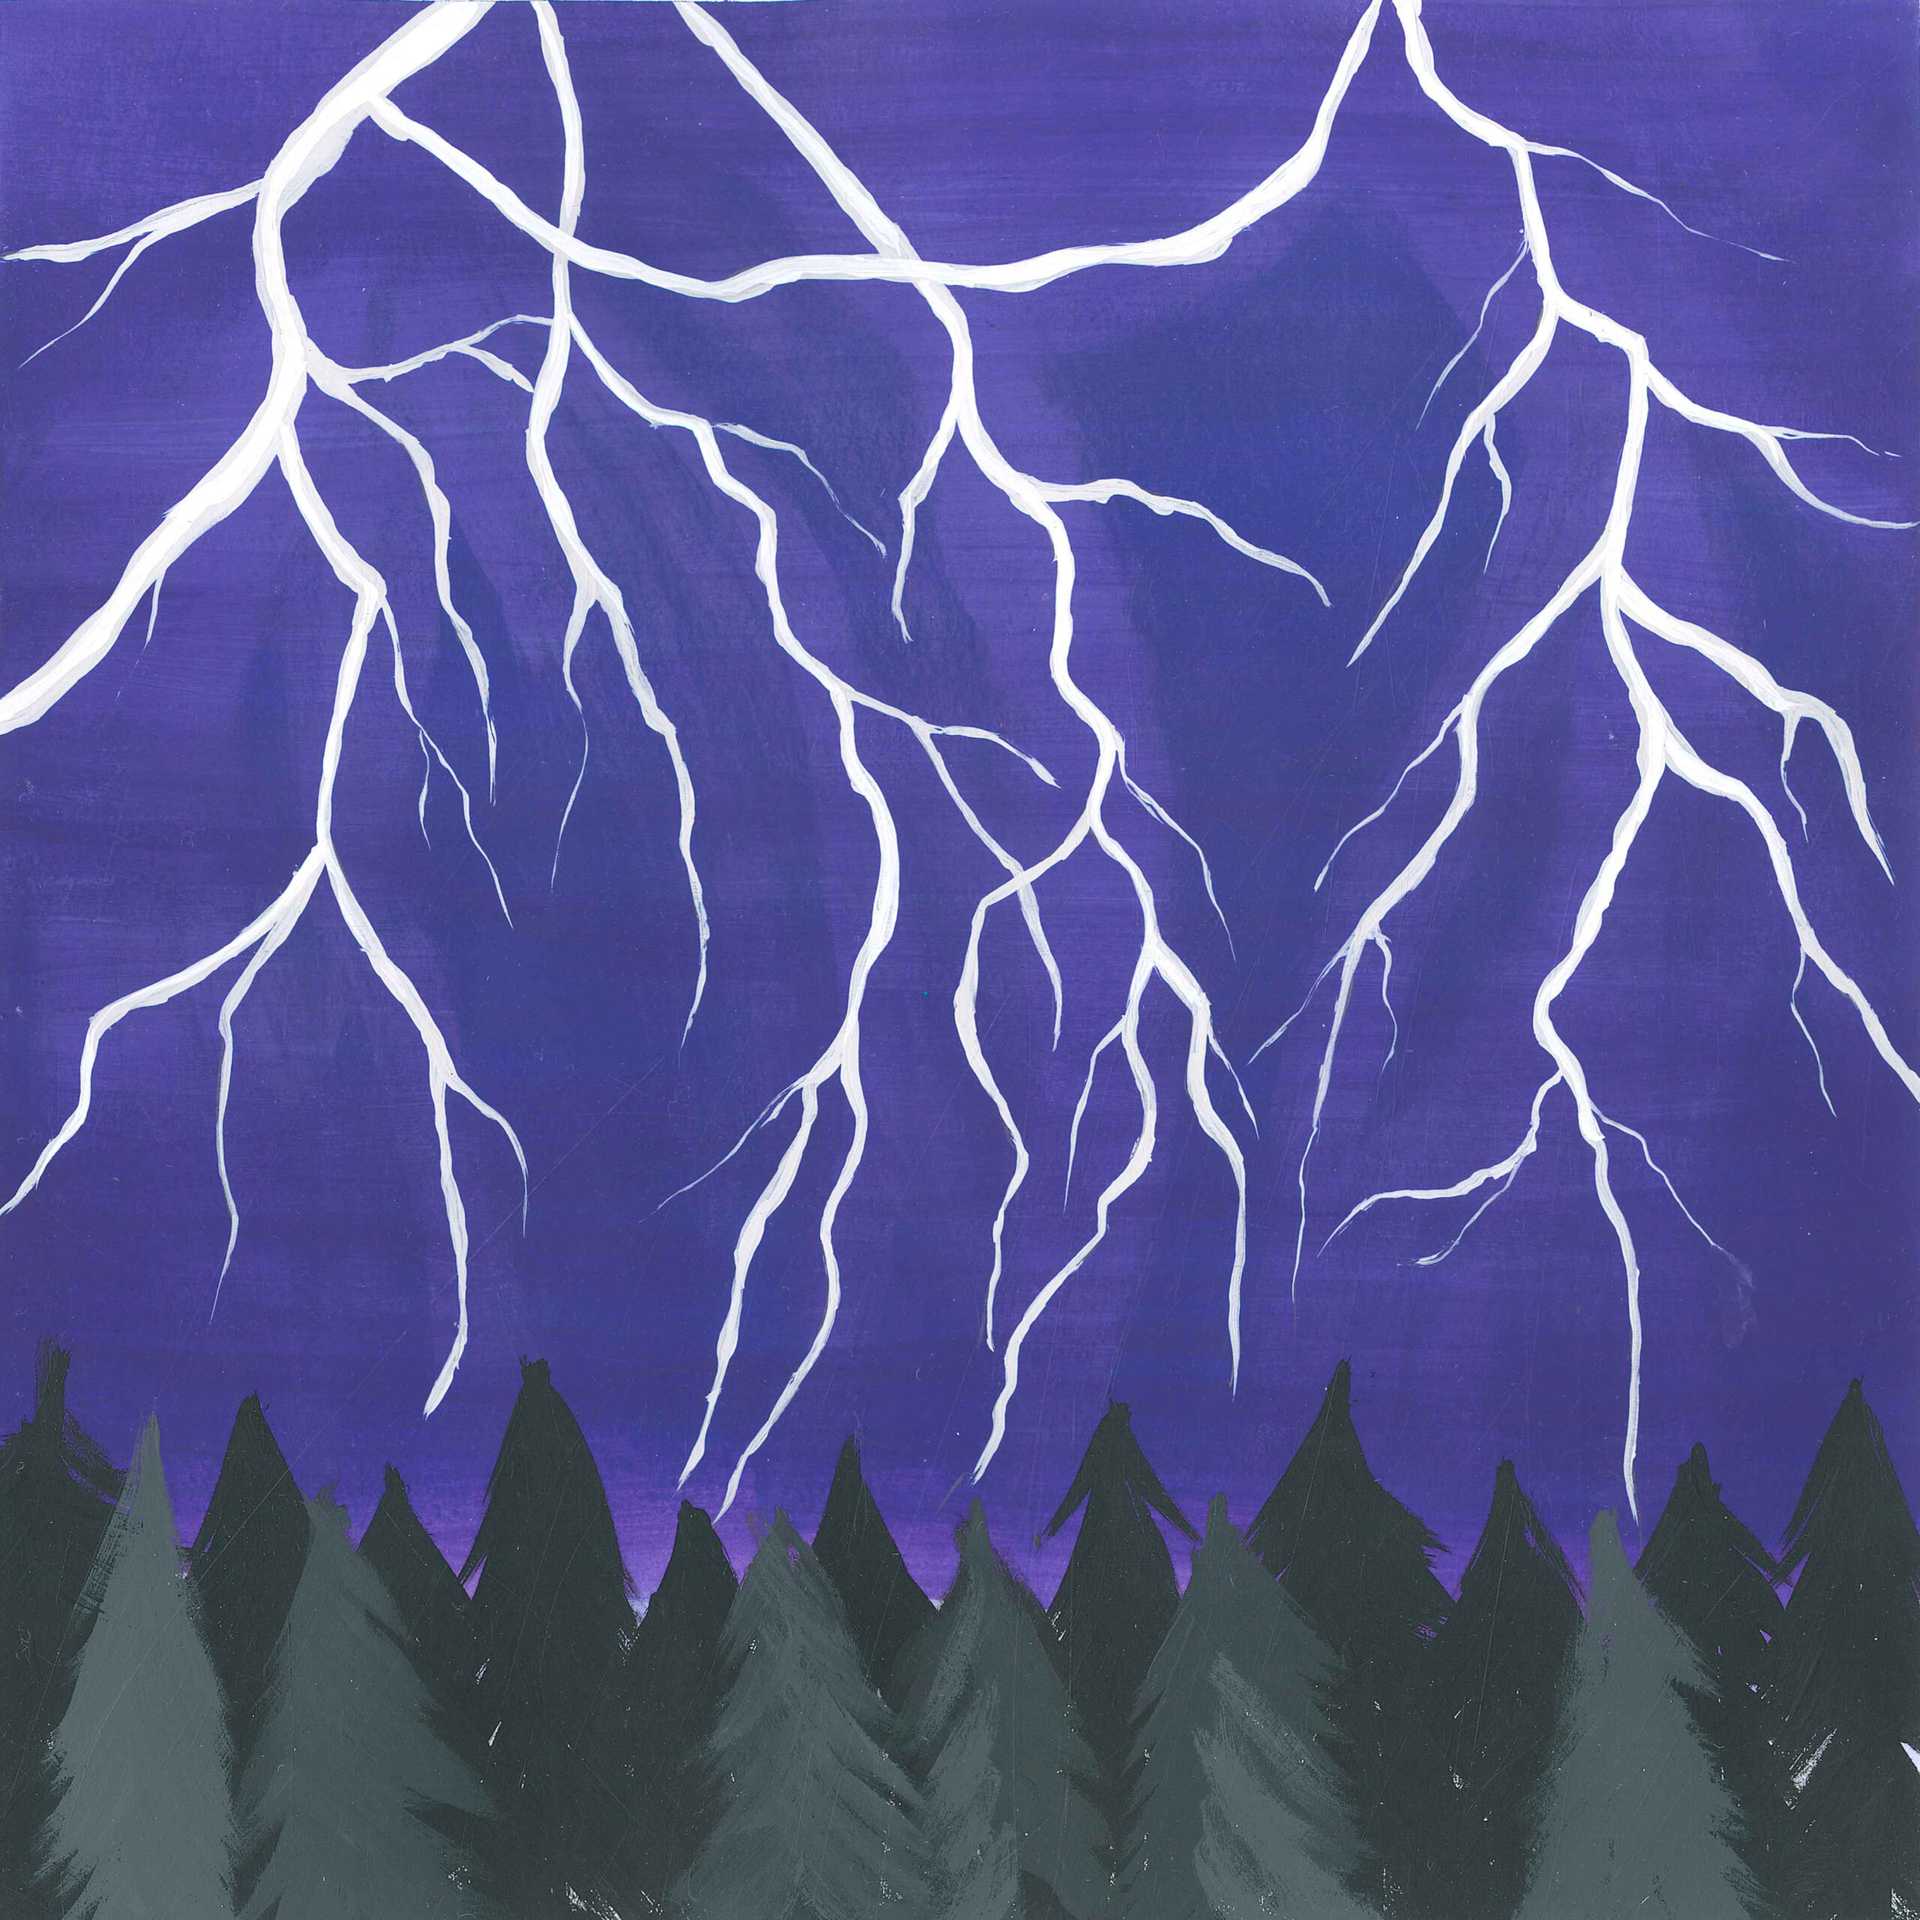 Pyrenean Woods in a Thundery Rainstorm - nature landscape painting - earth.fm